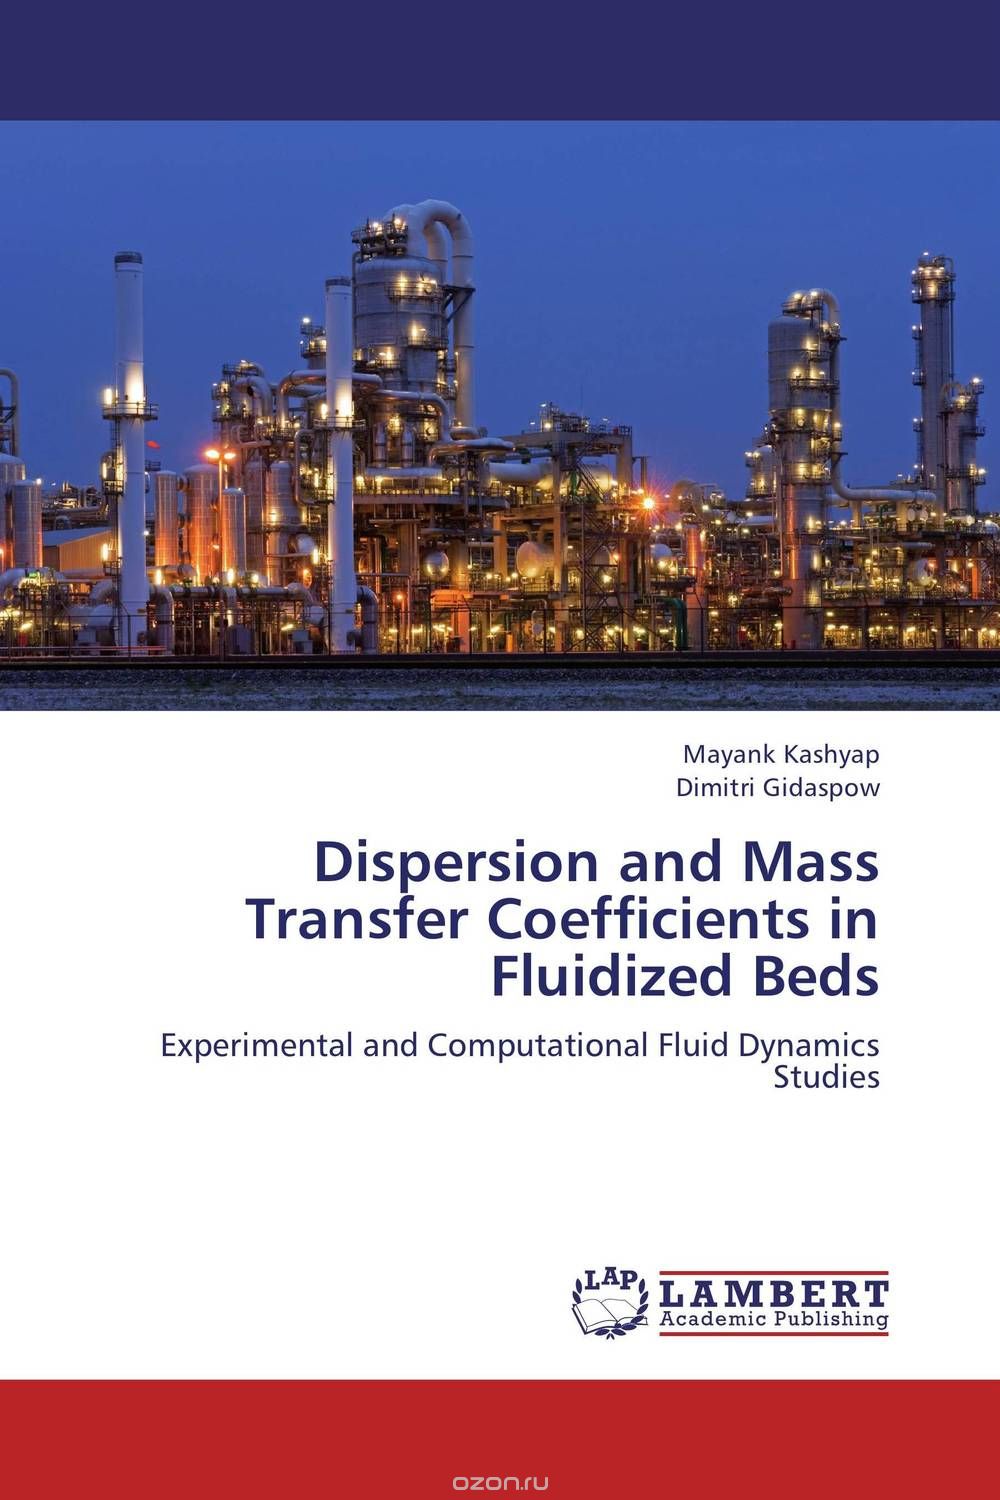 Dispersion and Mass Transfer Coefficients in Fluidized Beds